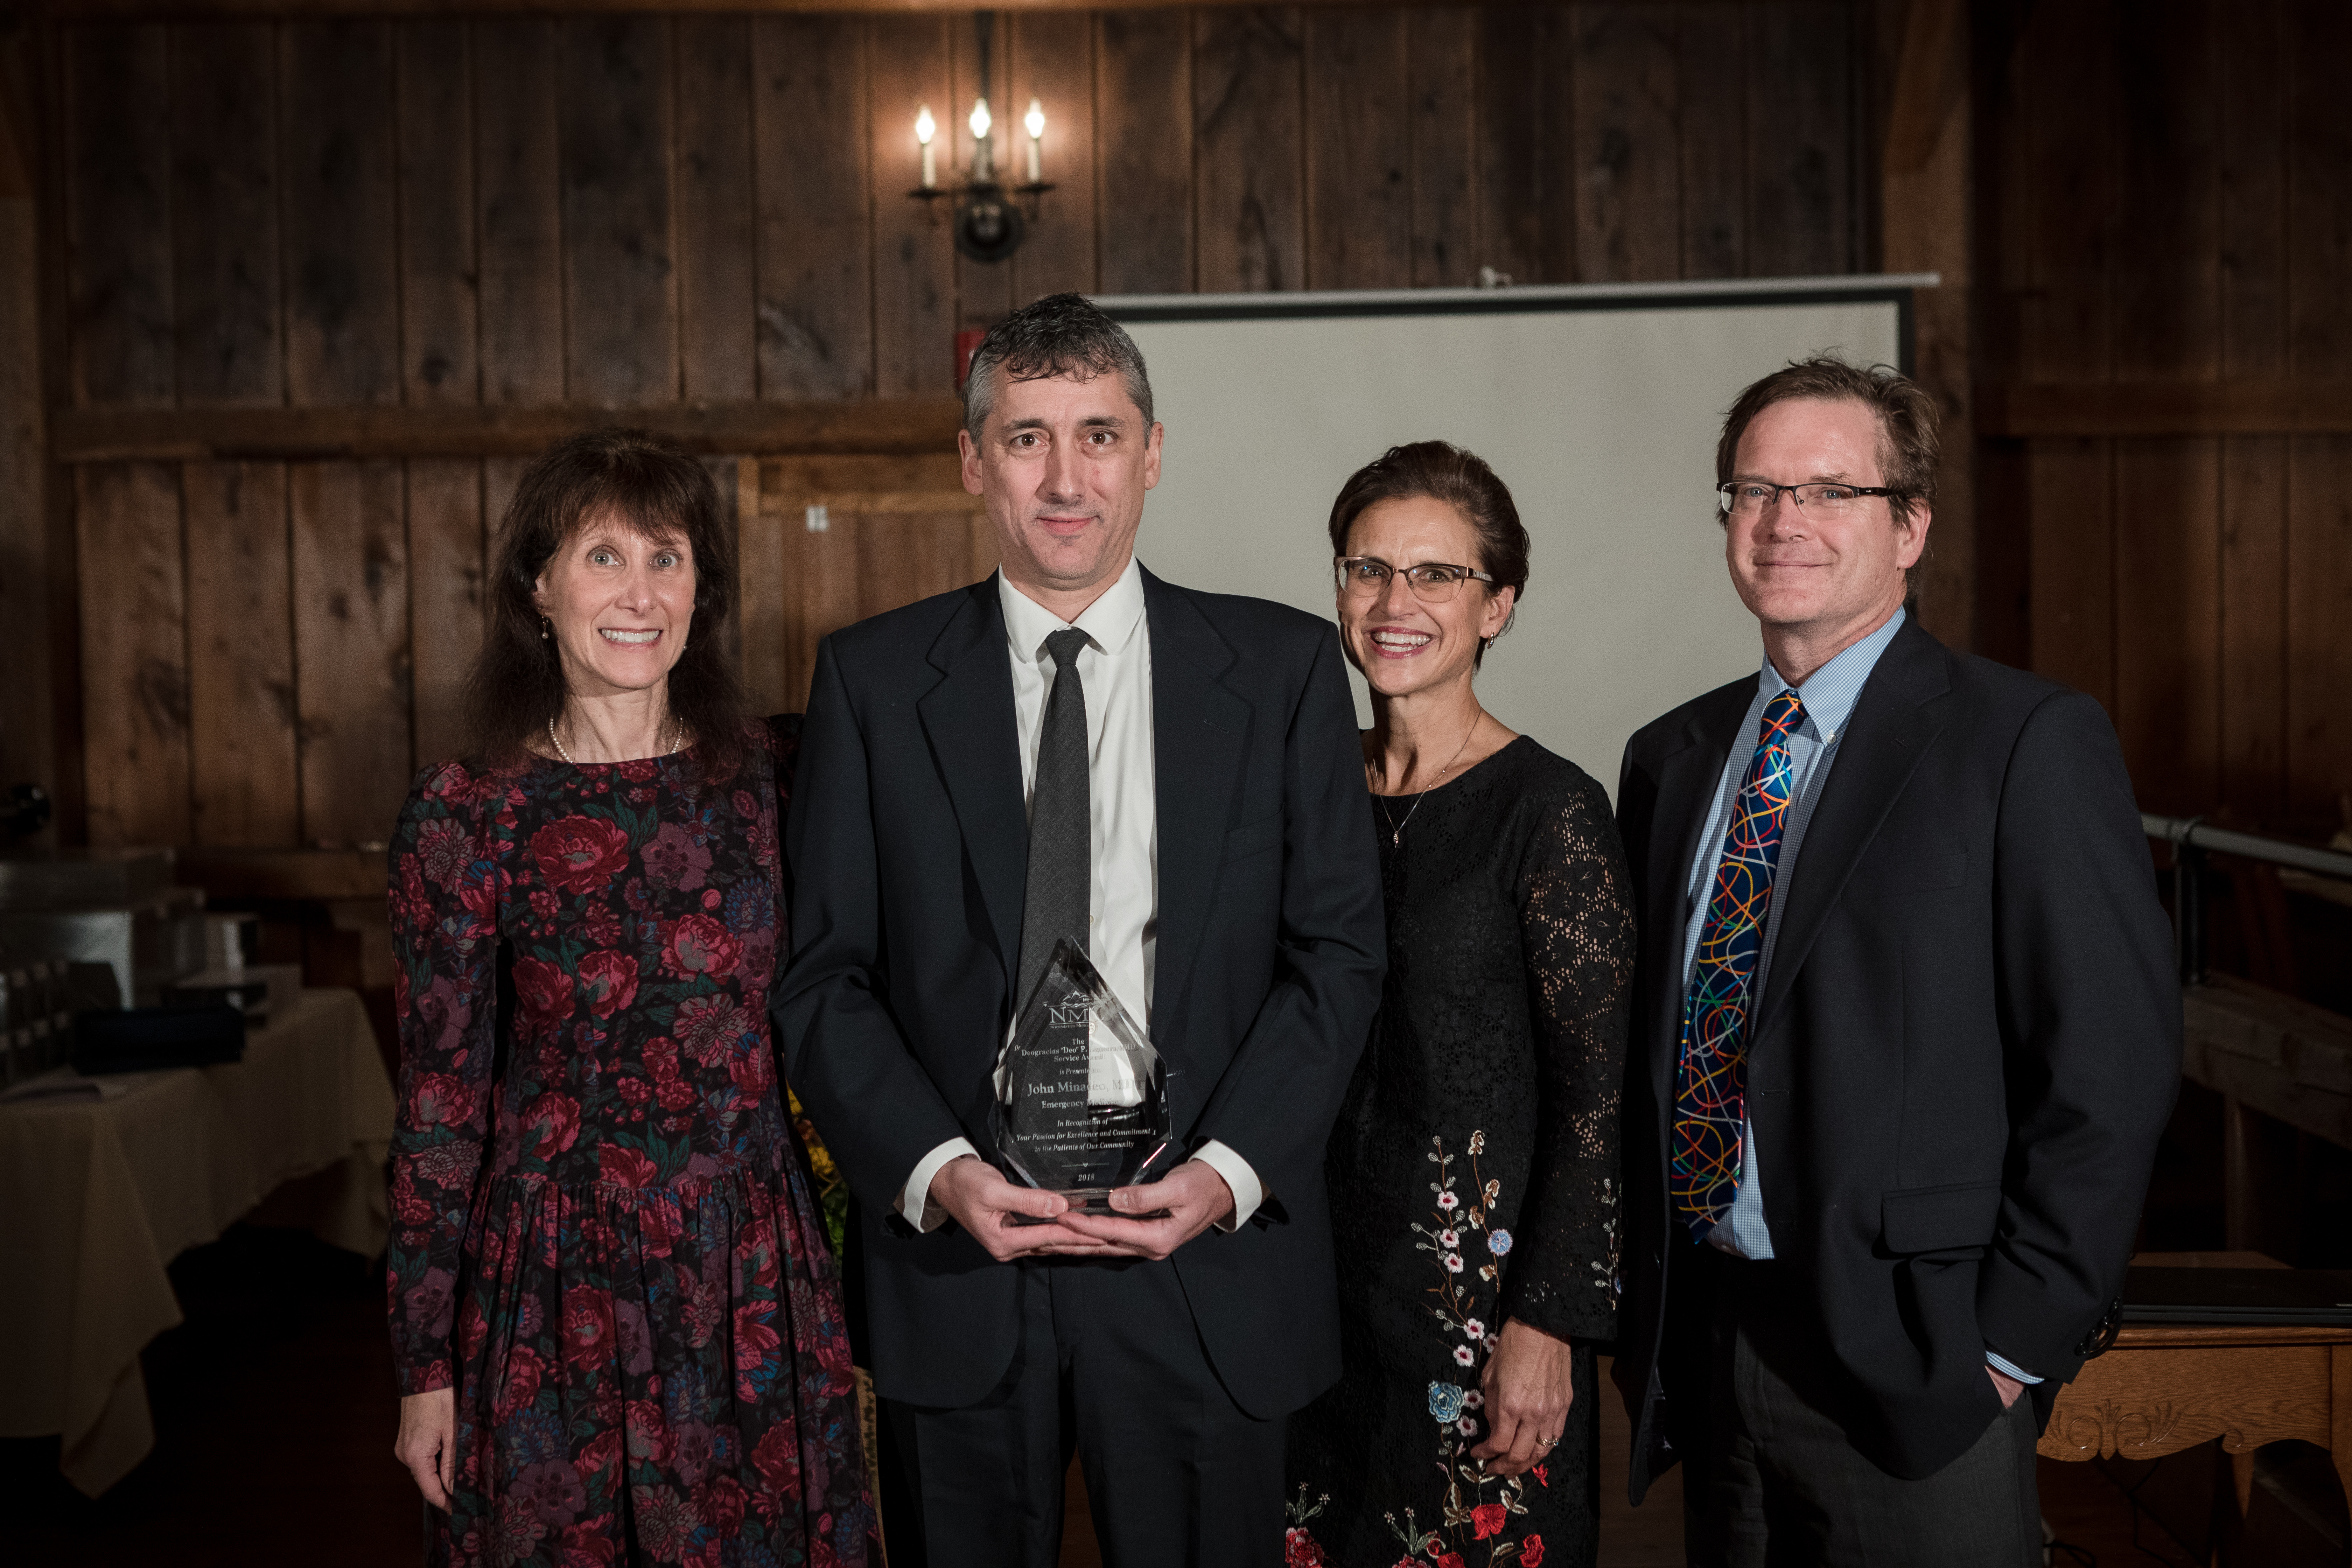 Dr. John Minadeo accepted the “Deo” P. Esguerra, MD Service Award recently. He’s pictured here with the award, and (from left to right) Dr. Toby Sadkin, CEO Jill Berry Bowen, RN and Chief Medical Officer, Dr. Lowrey Sullivan.